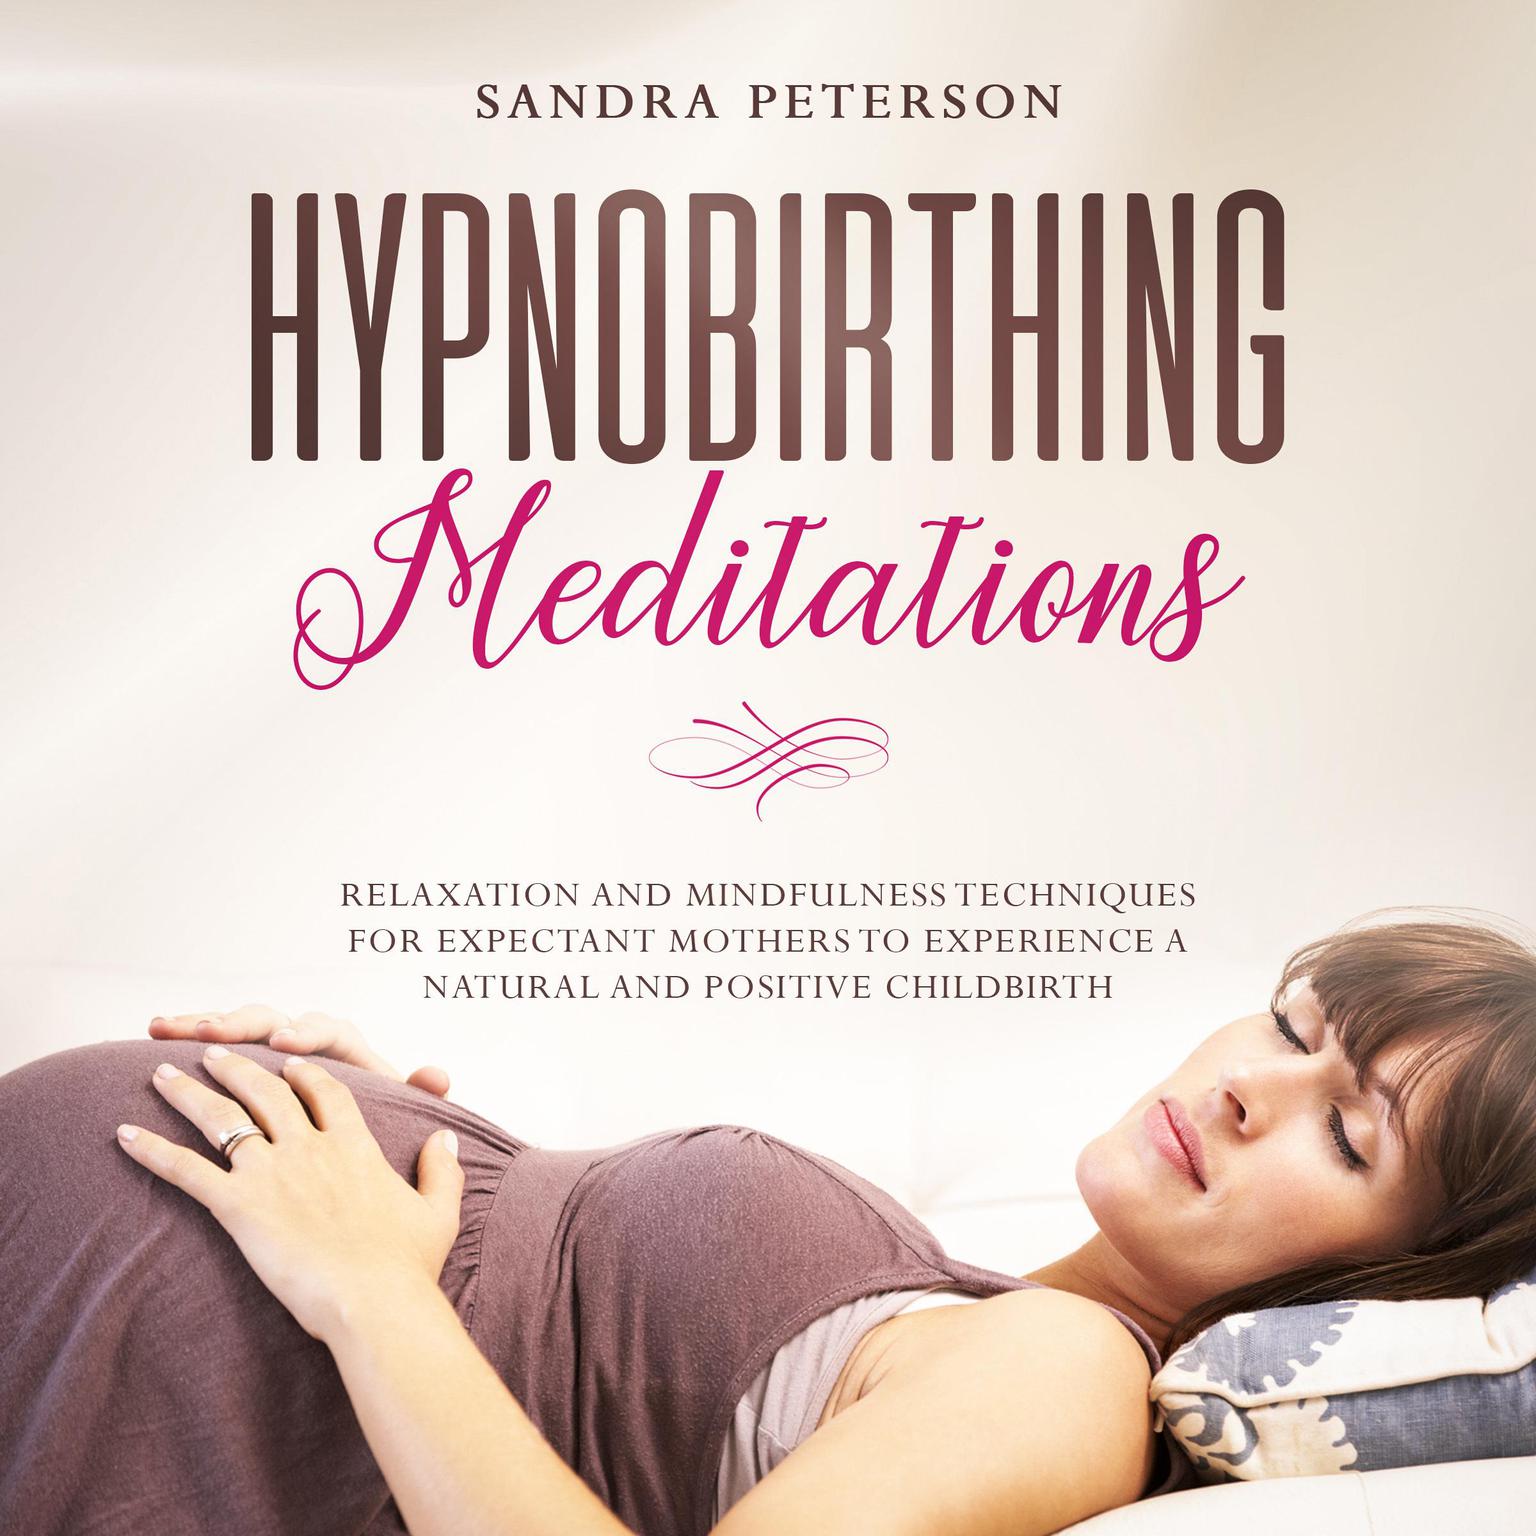 Hypnobirthing Meditations: Relaxation And Mindfulness Techniques For Expectant Mothers To Experience A Natural And Positive Childbirth Audiobook, by Sandra Peterson